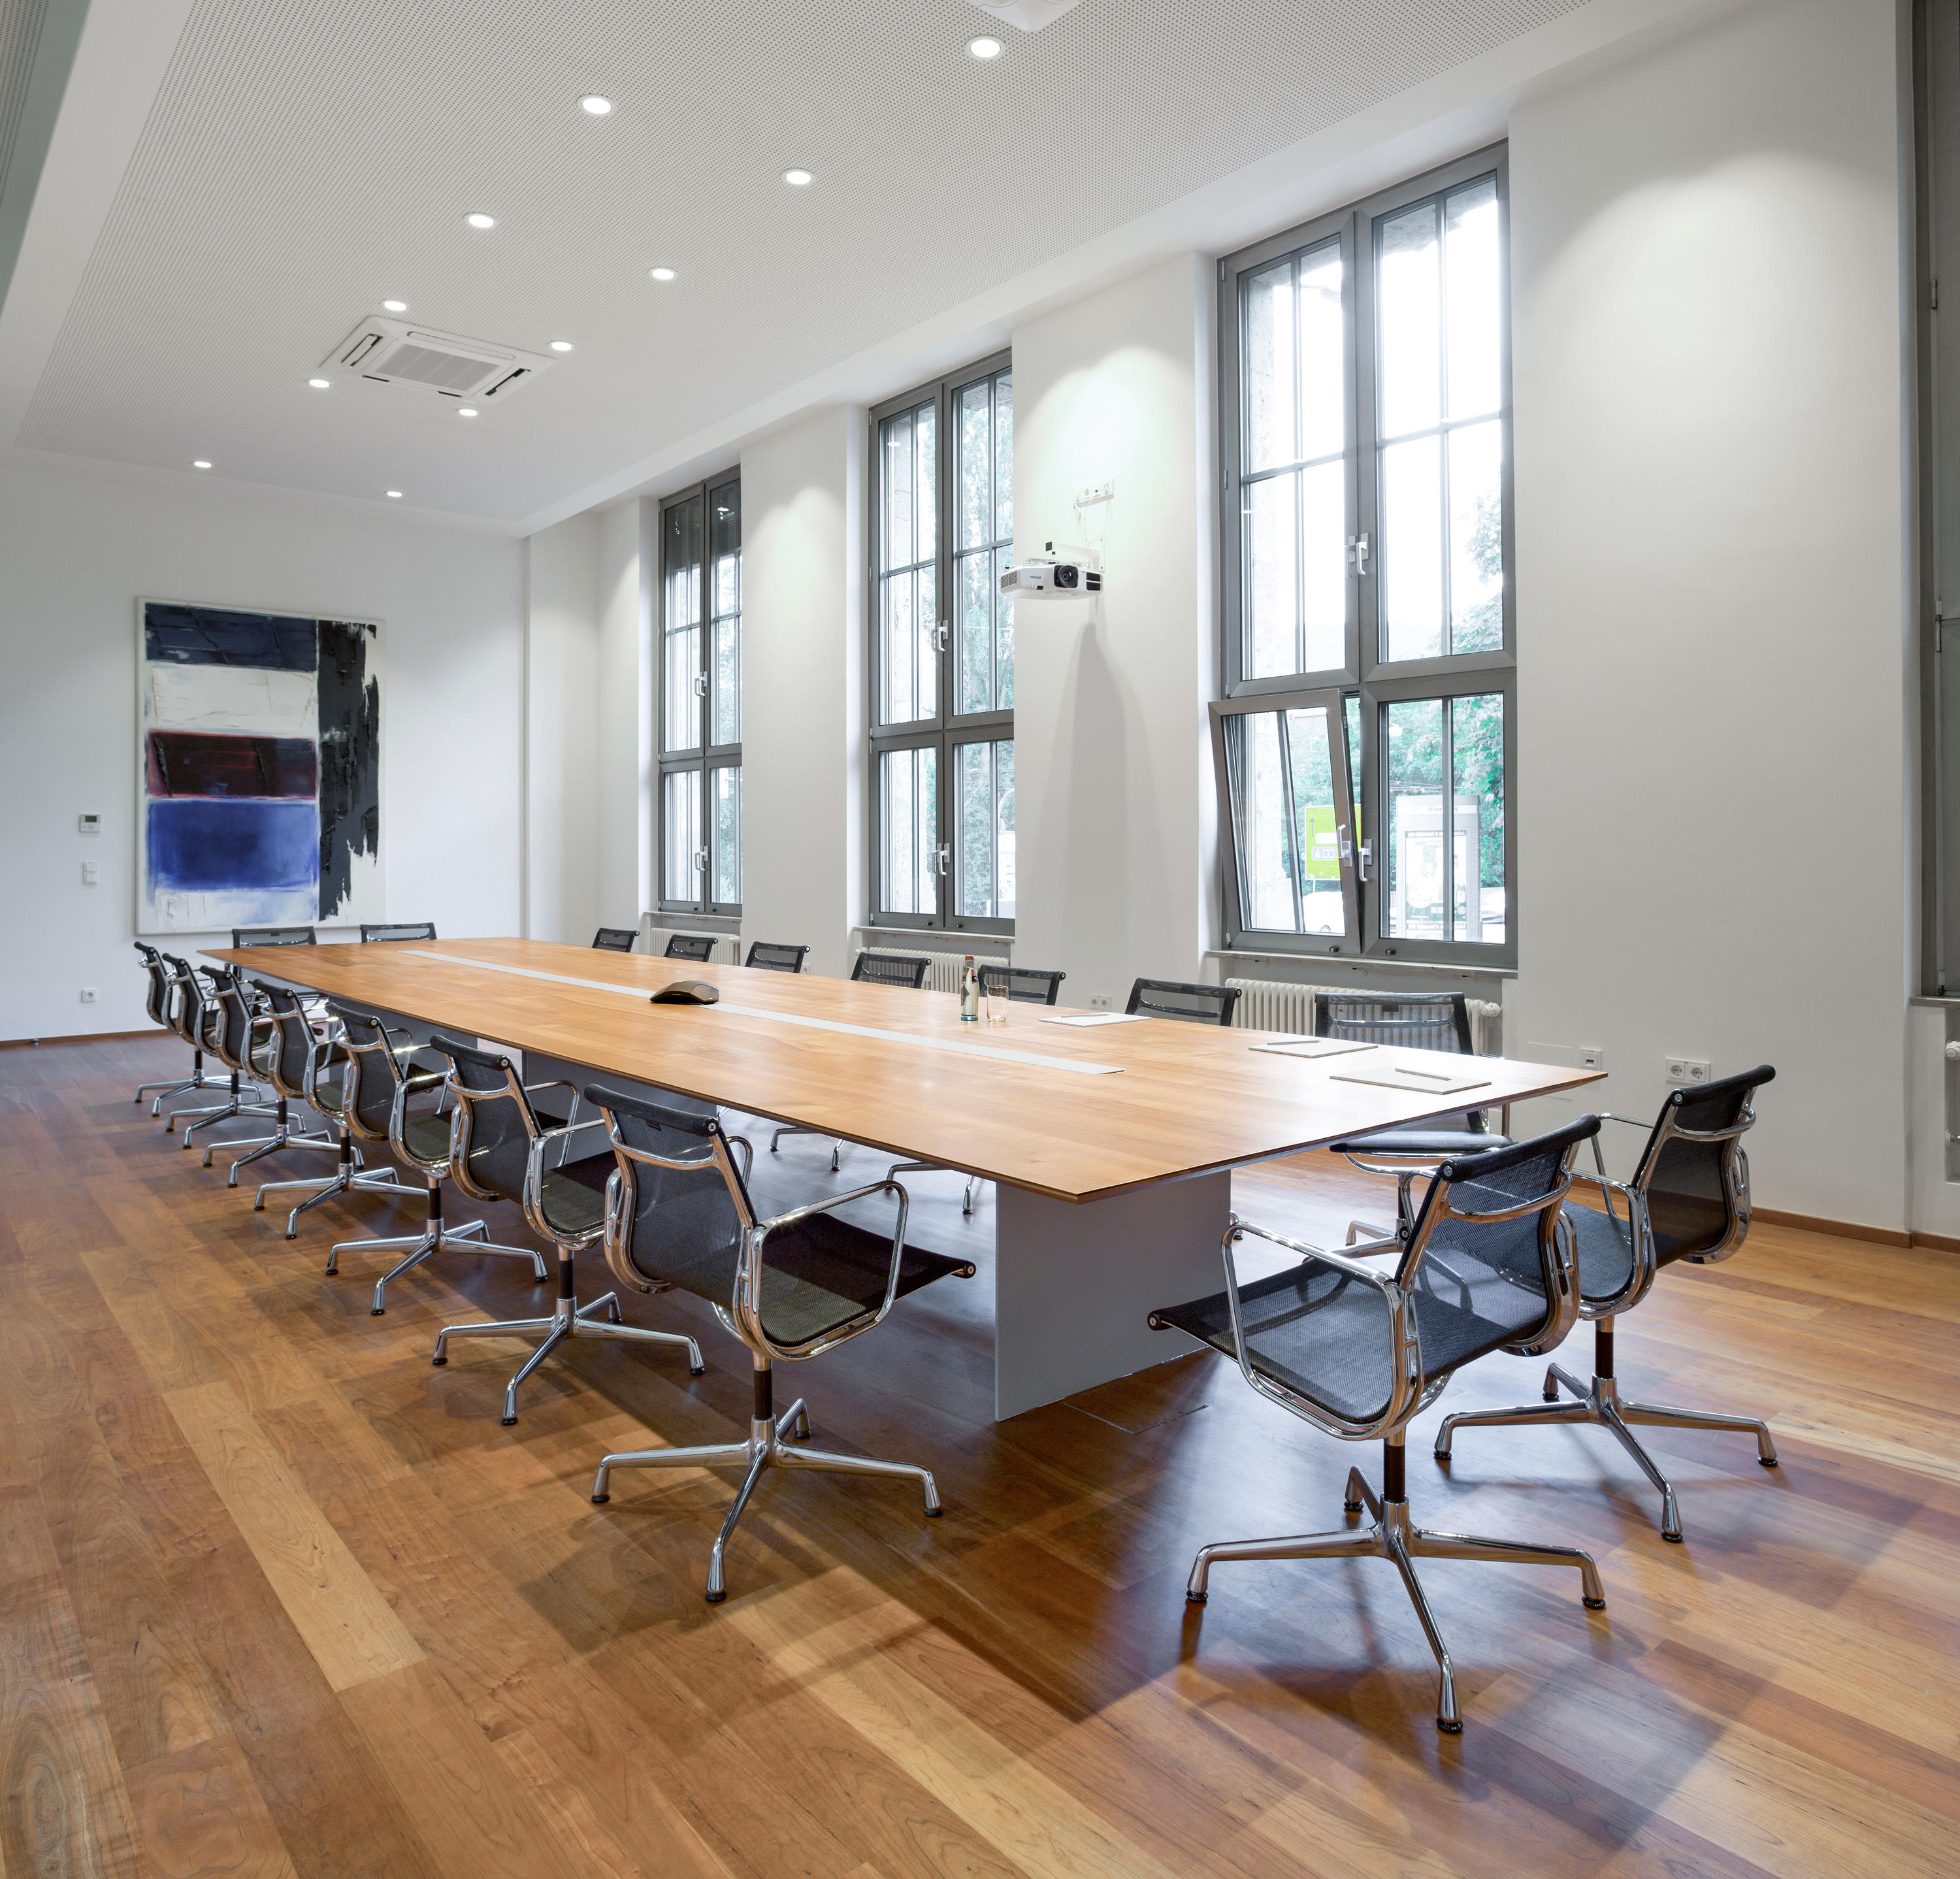 TIX CONFERENCE - Contract tables from Mobimex | Architonic